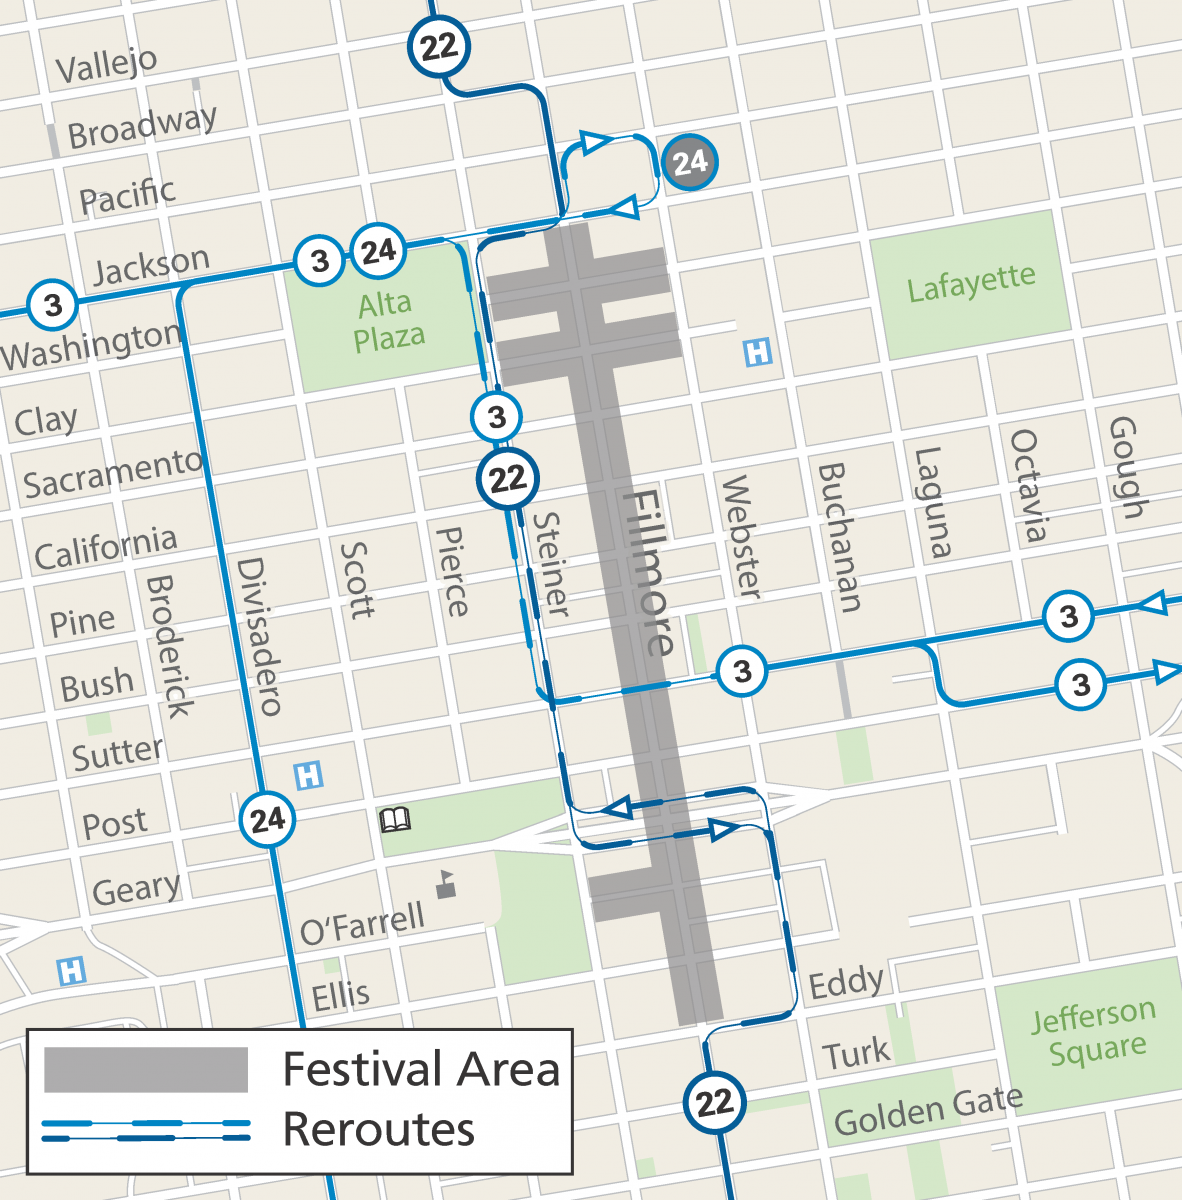 Map of Street Closures and Muni reroutes for the Fillmore Jazz Festival.